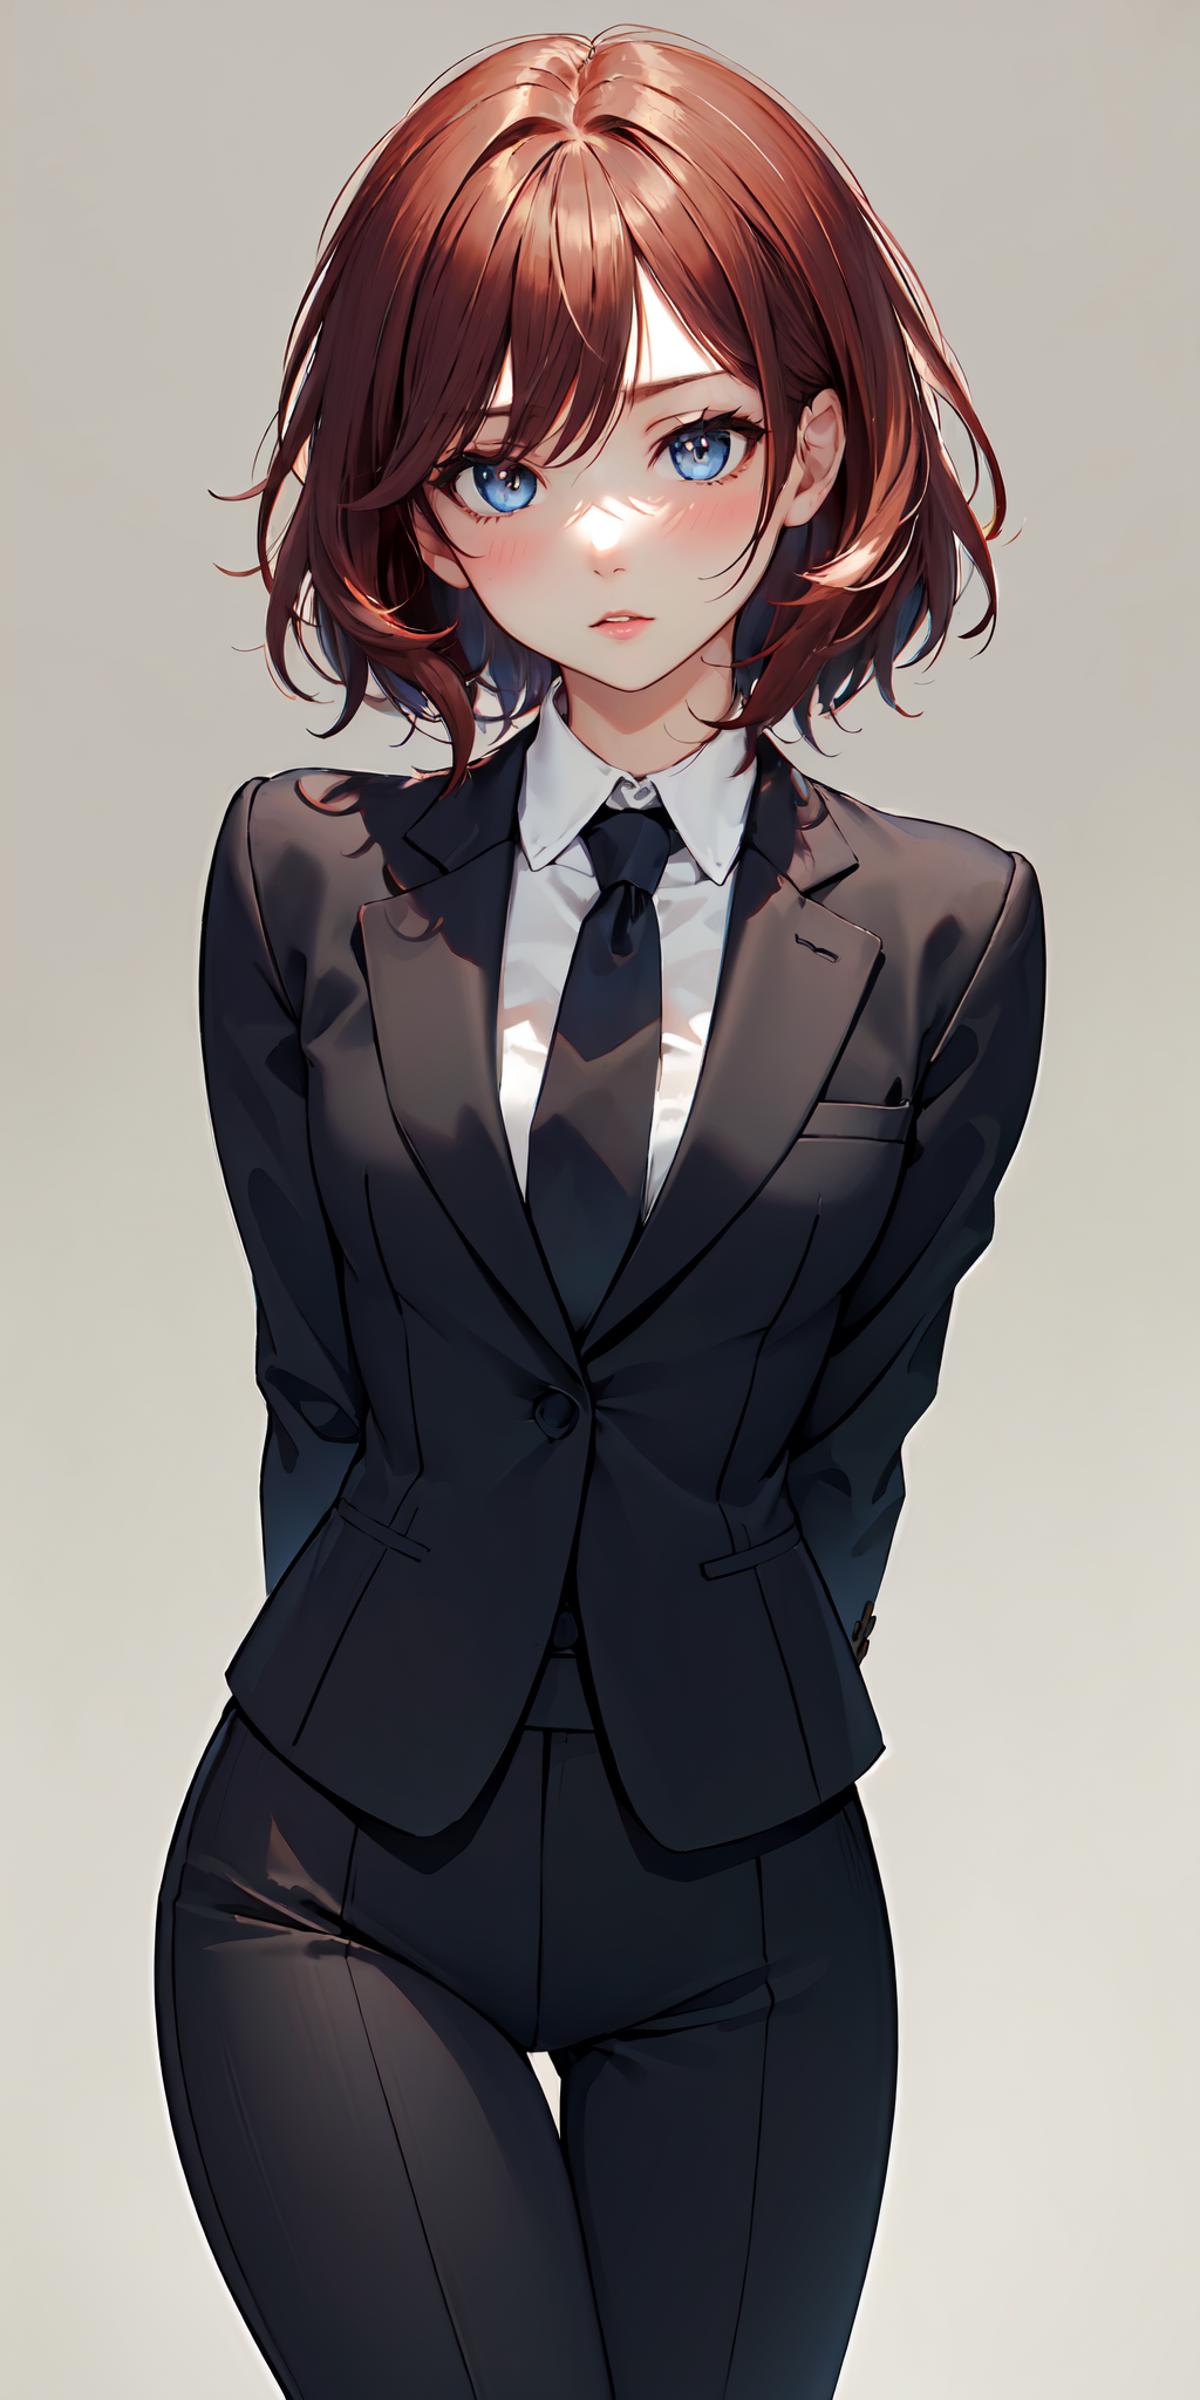 Woman Business Suit image by Cornemuse